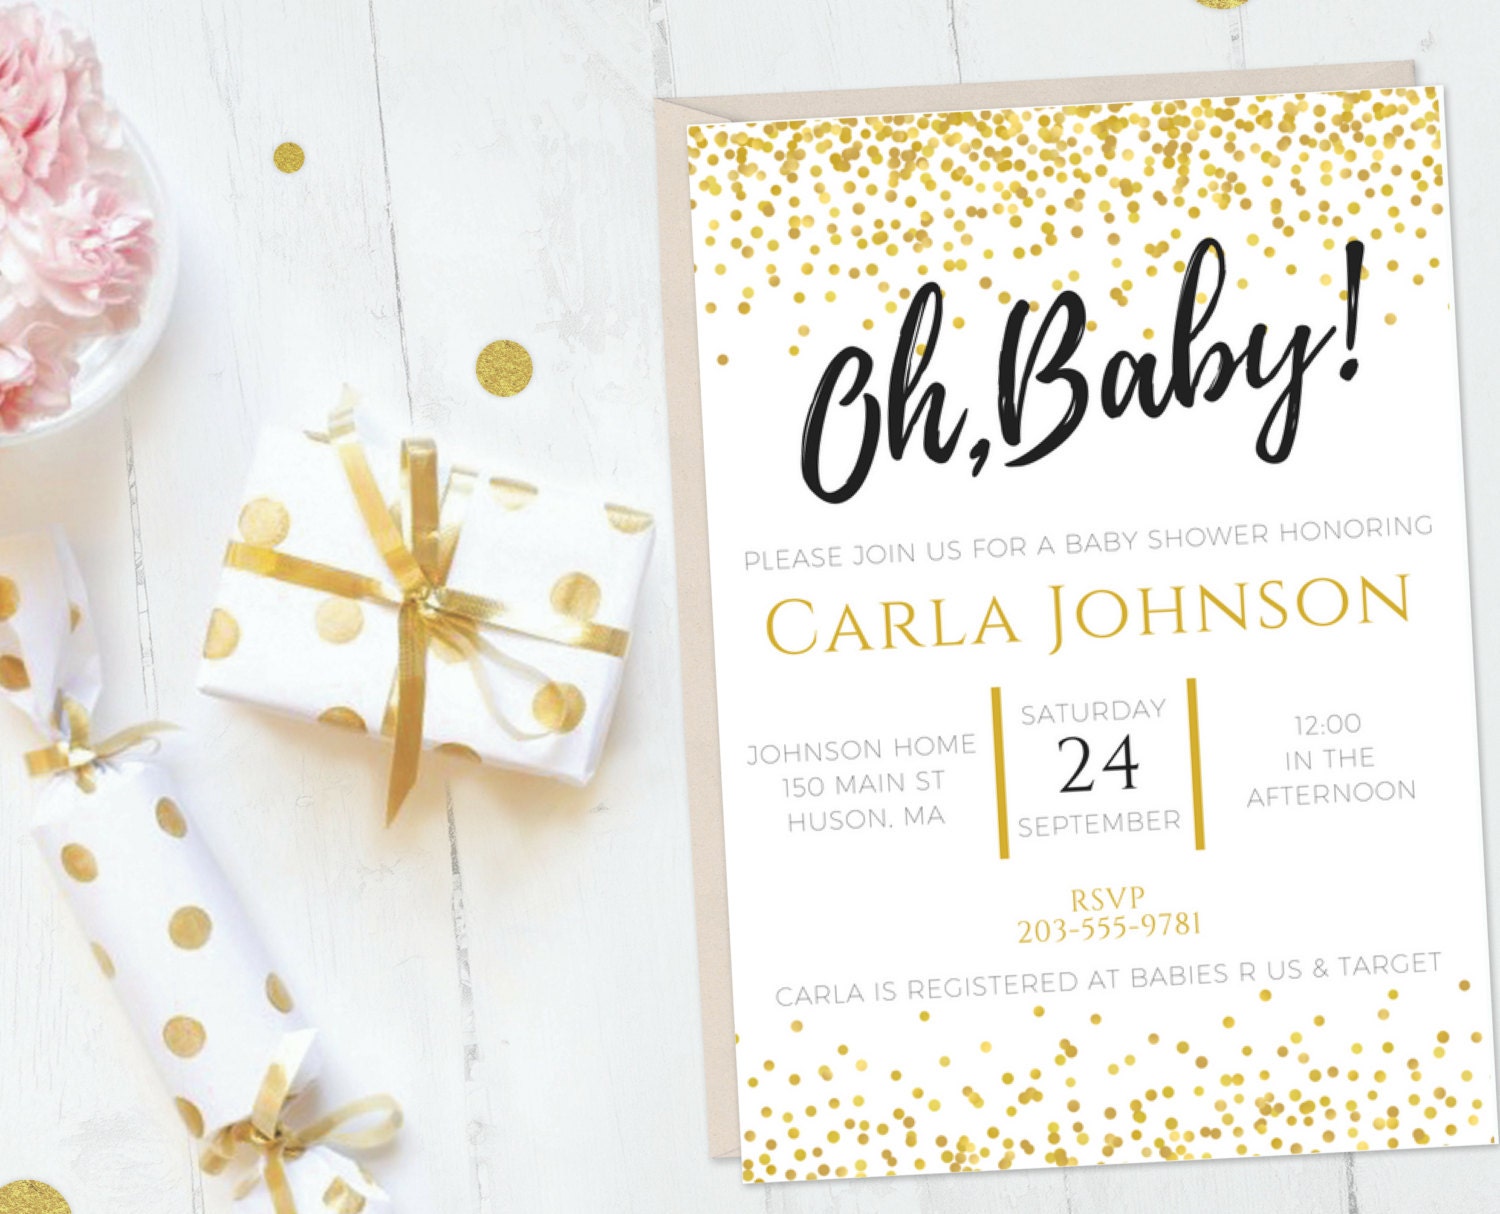 Oh Baby Shower Invitations 7